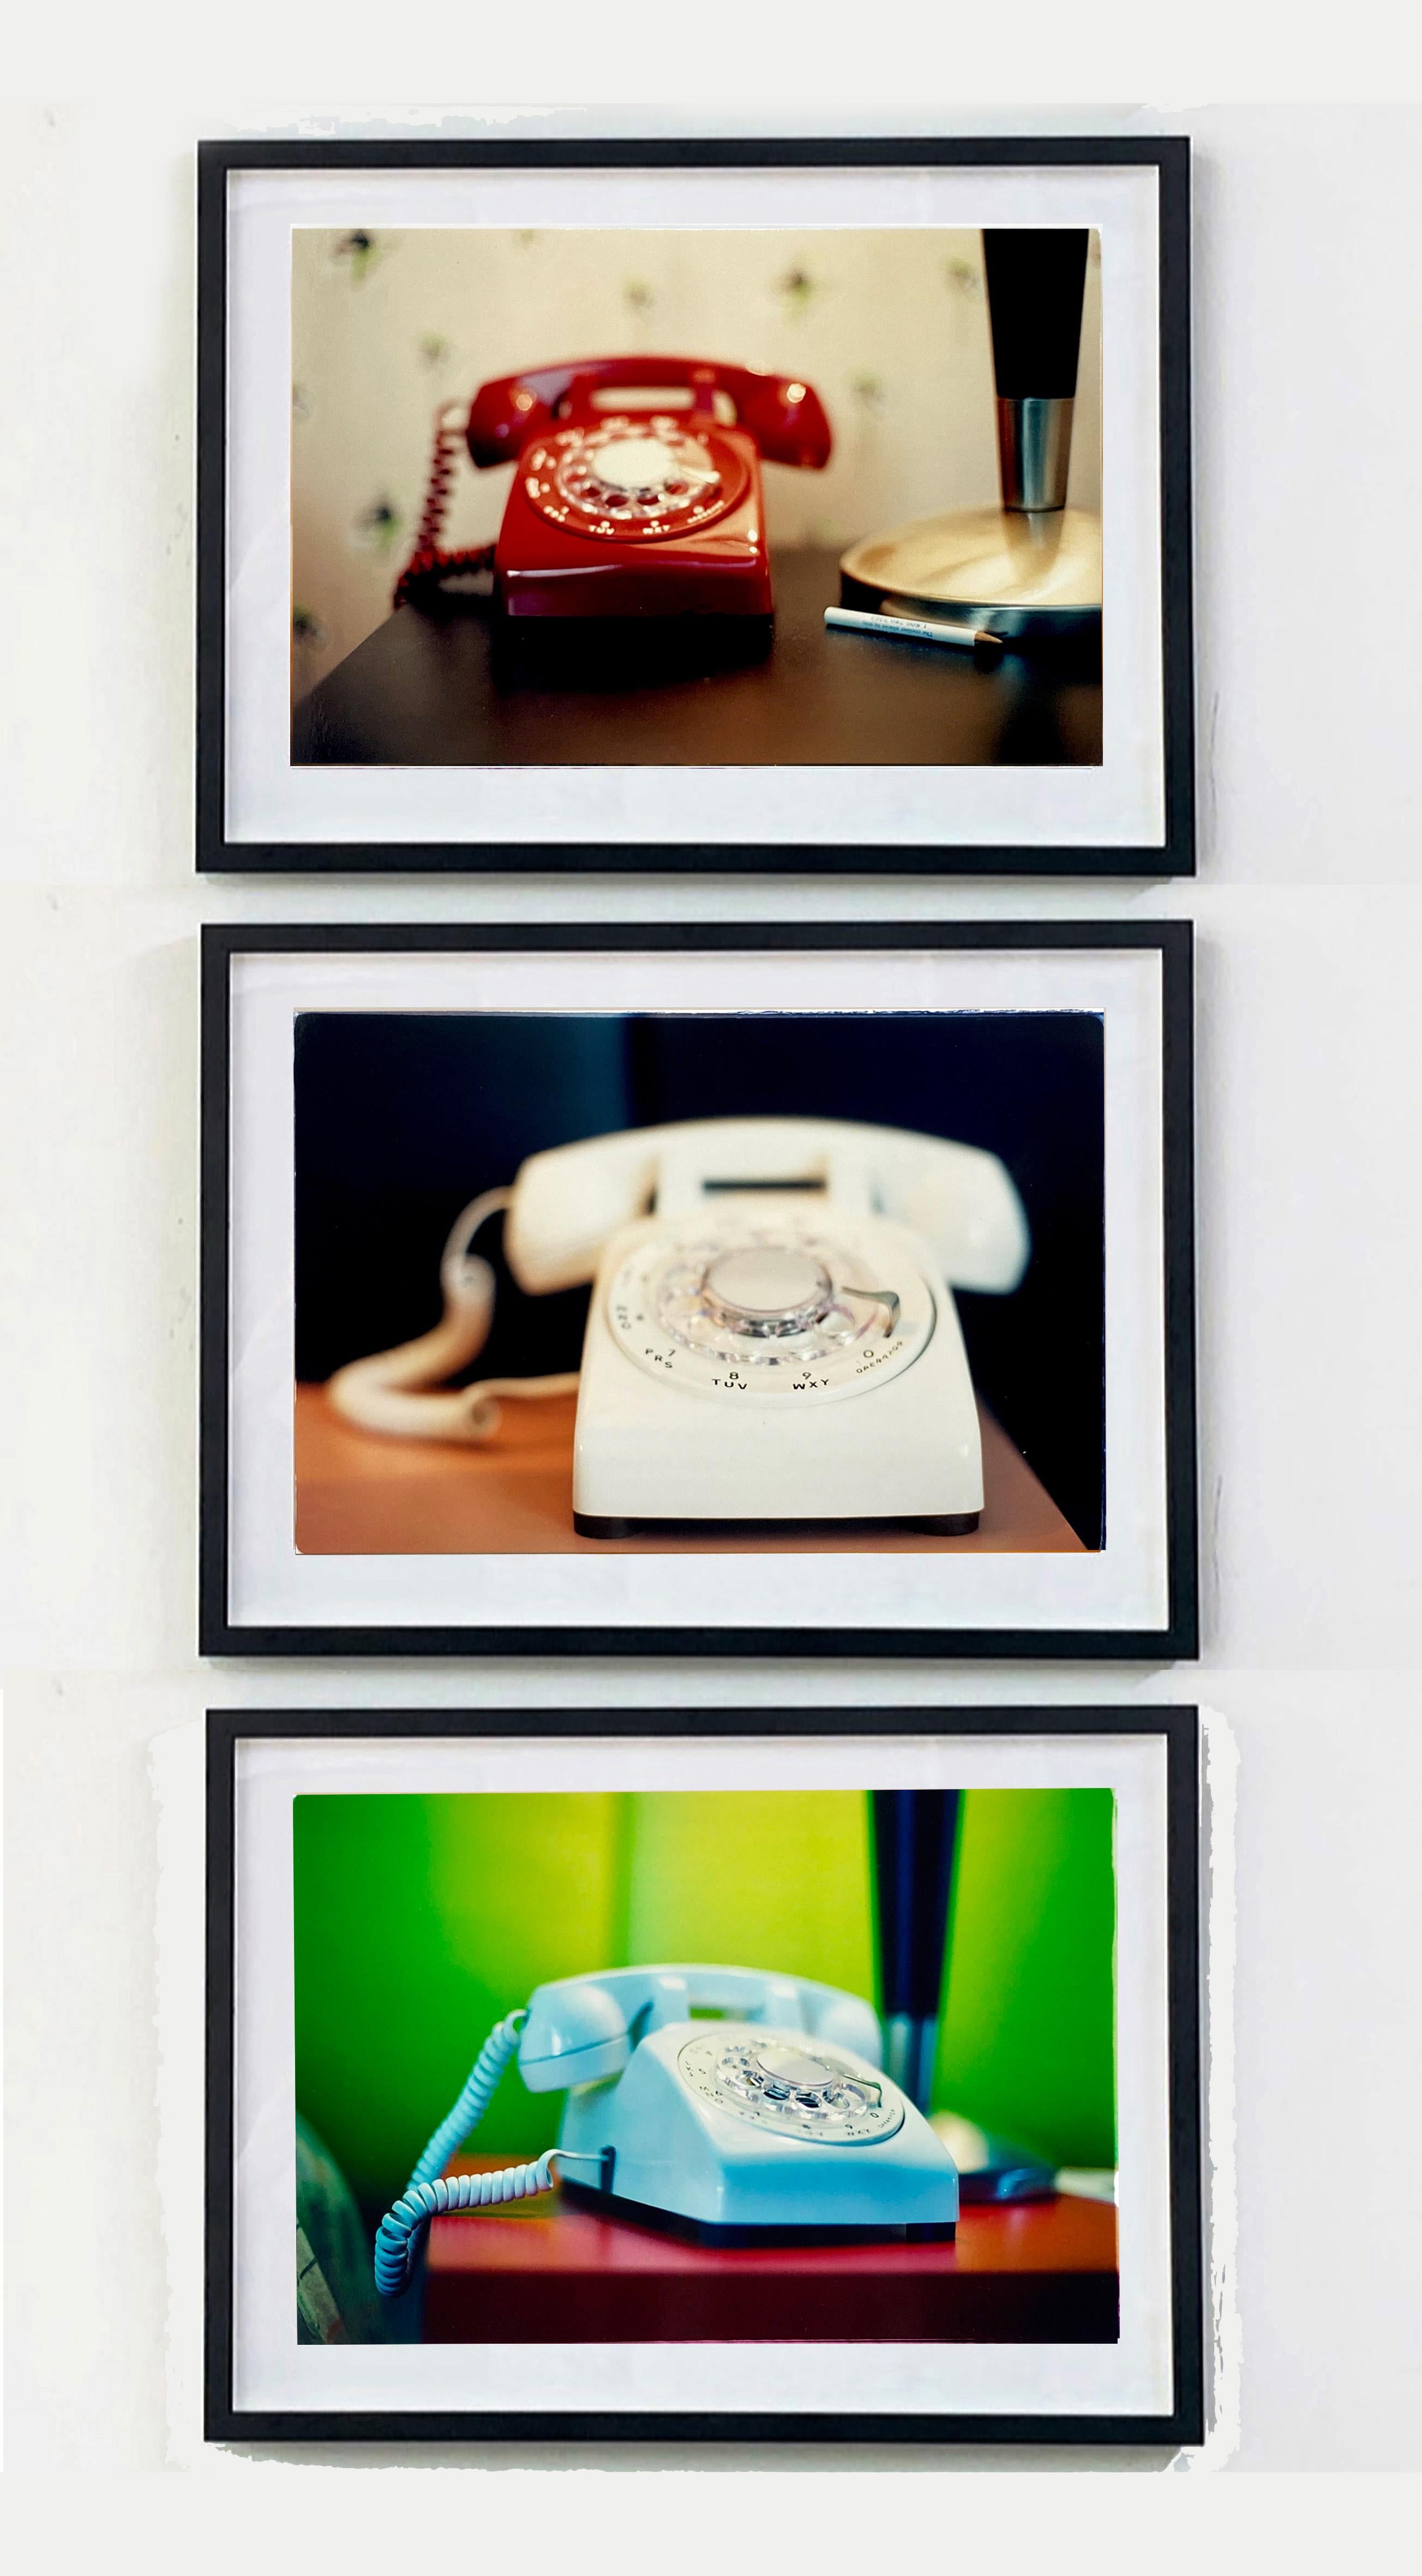 Telephone III, Ballantines Movie Colony, Palm Springs - Interior Color Photo - Contemporary Photograph by Richard Heeps